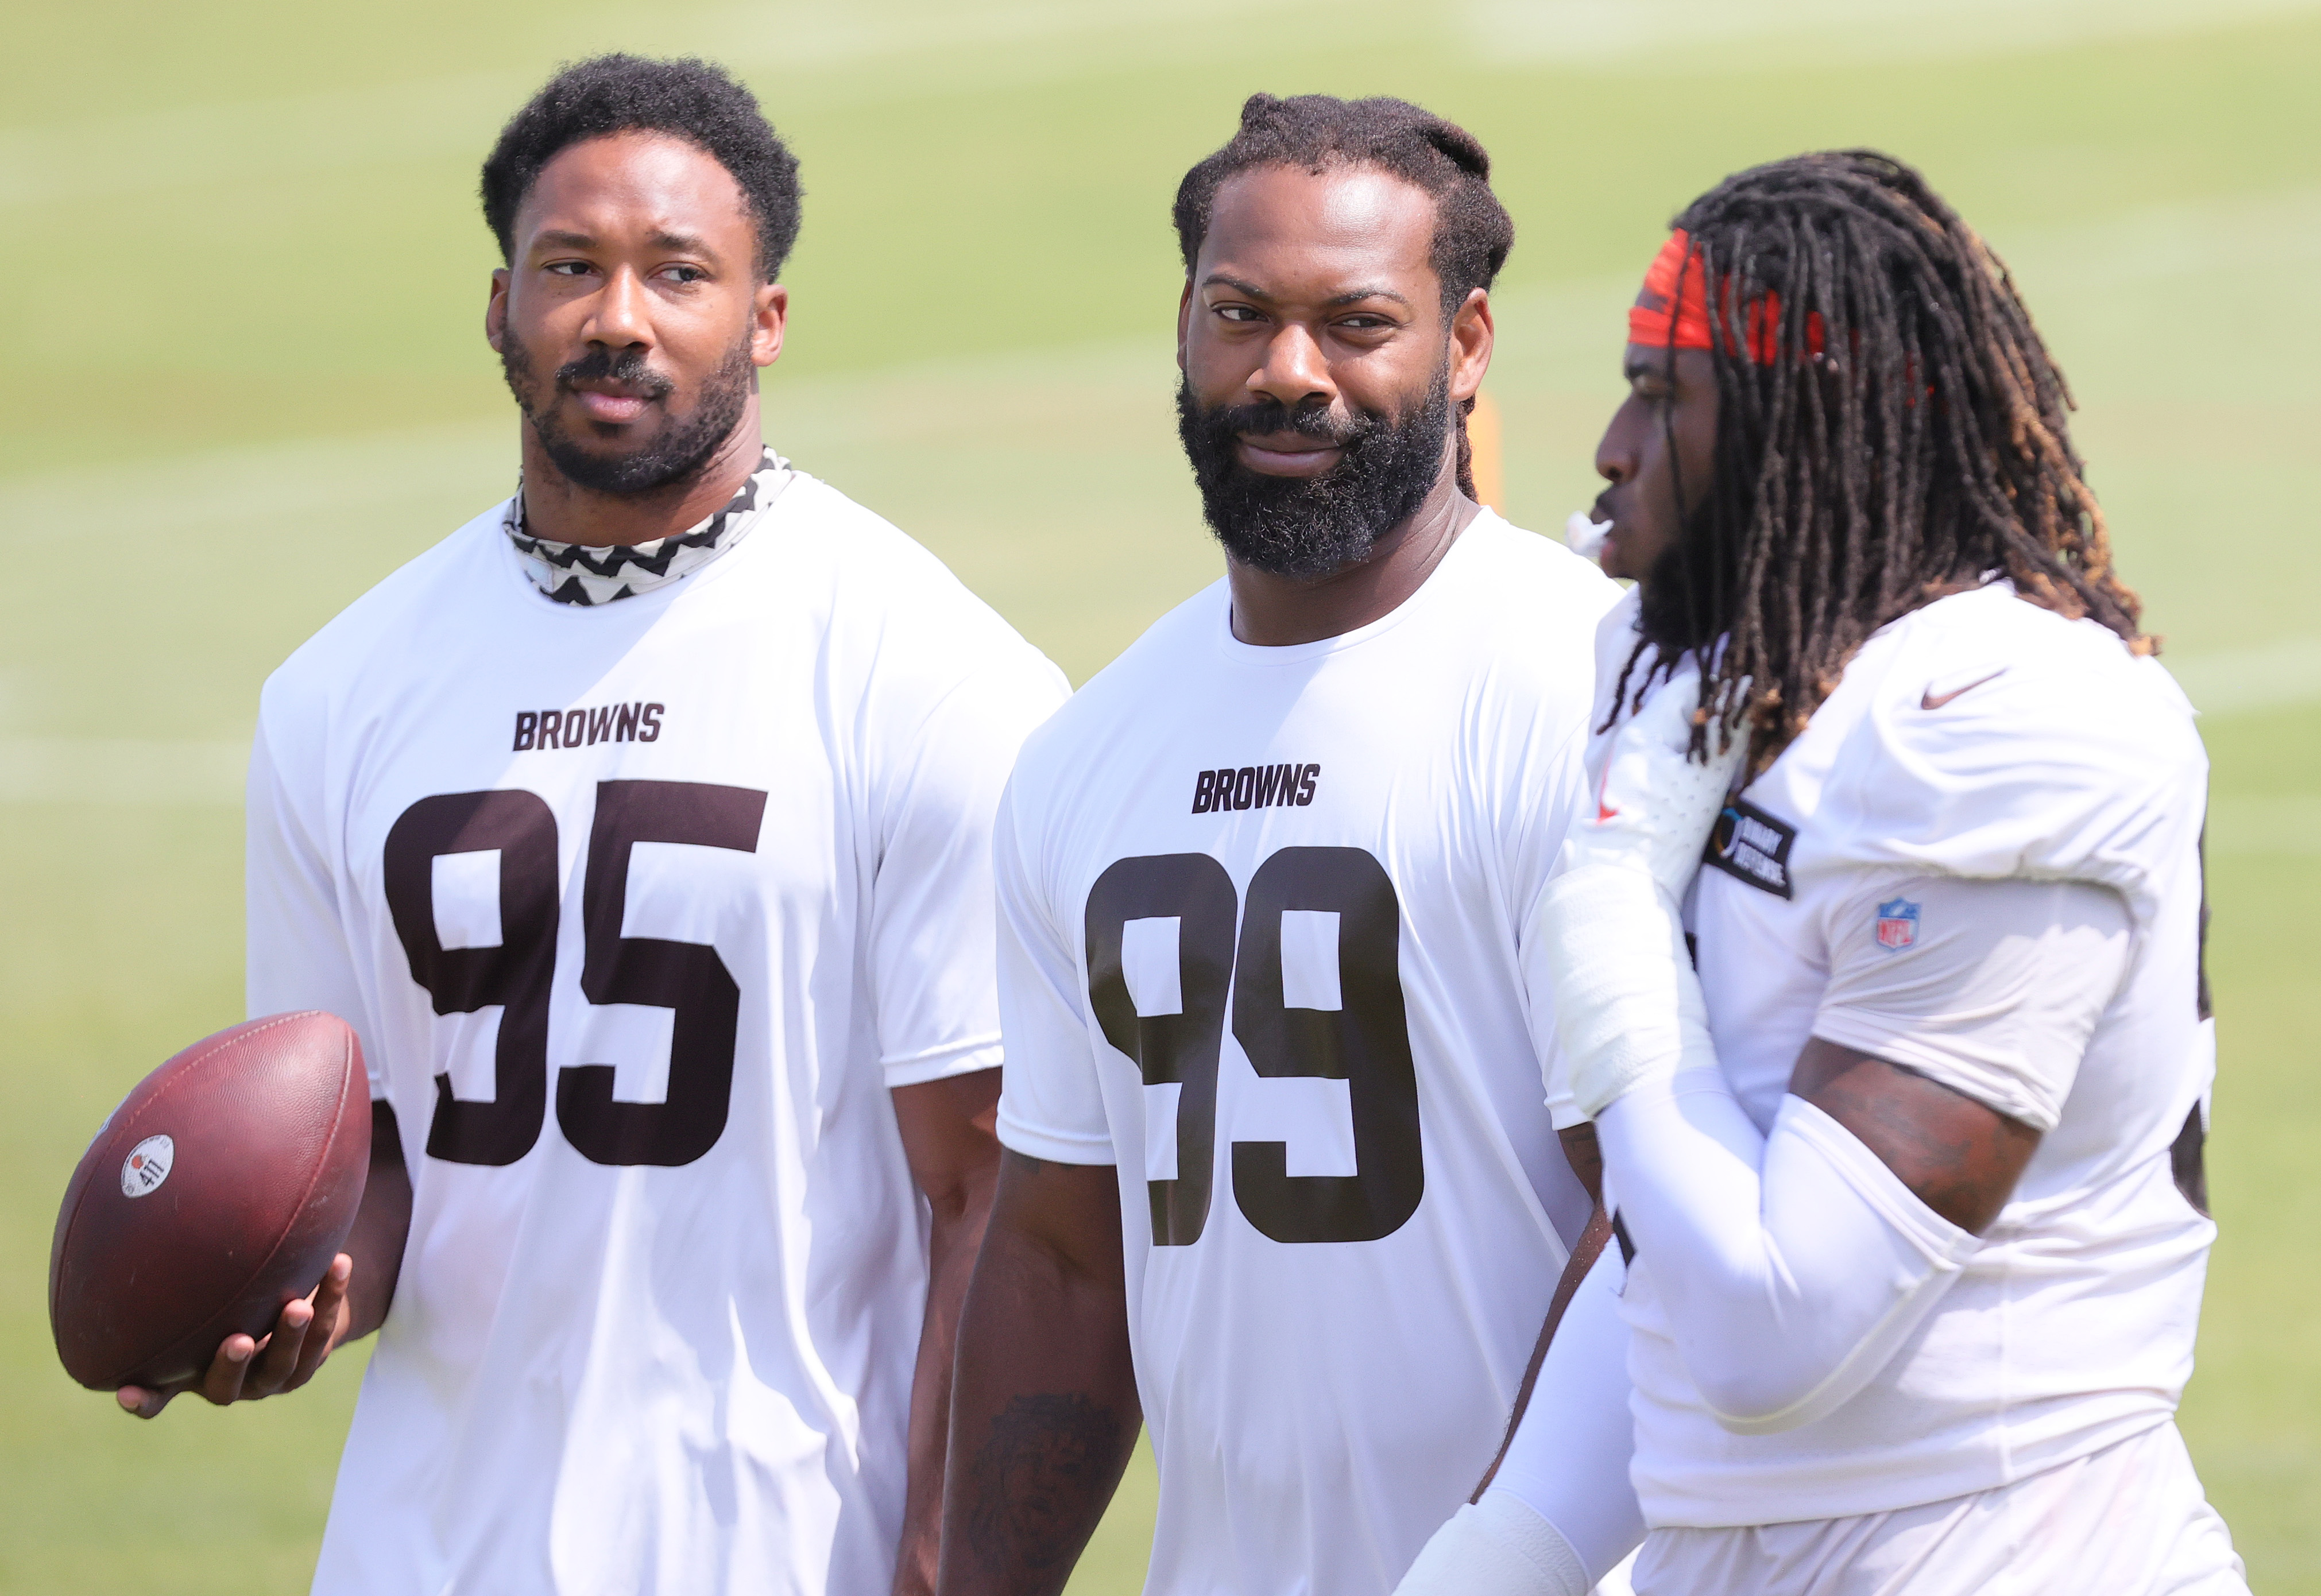 Myles Garrett thrilled to be paired with Za'Darius Smith, sees